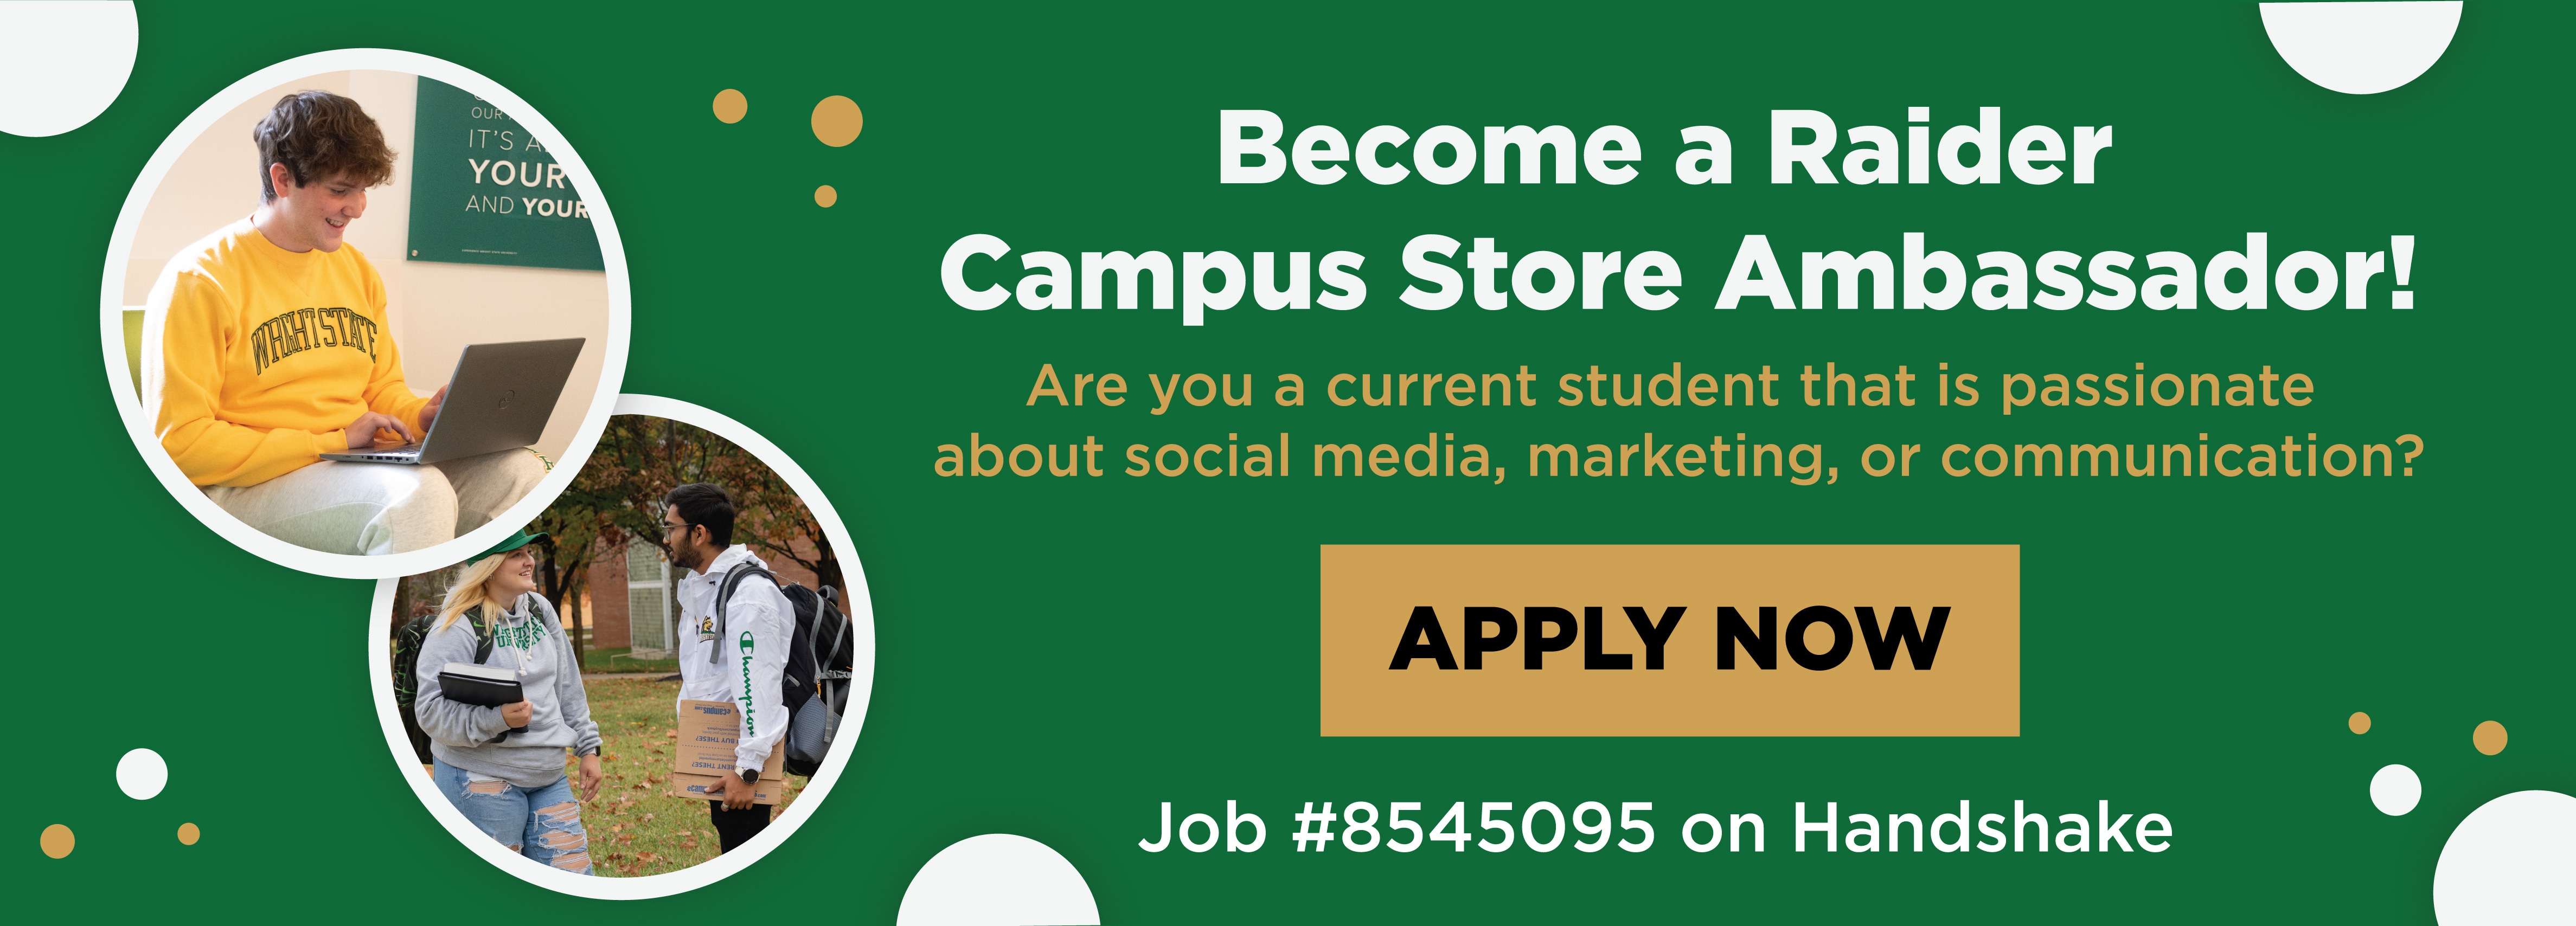 Become a Raider Campus Store Ambassador! Are you a current student that is passionate about social media, marketing, or communication? Apply Now Job #8545095 on Handshake